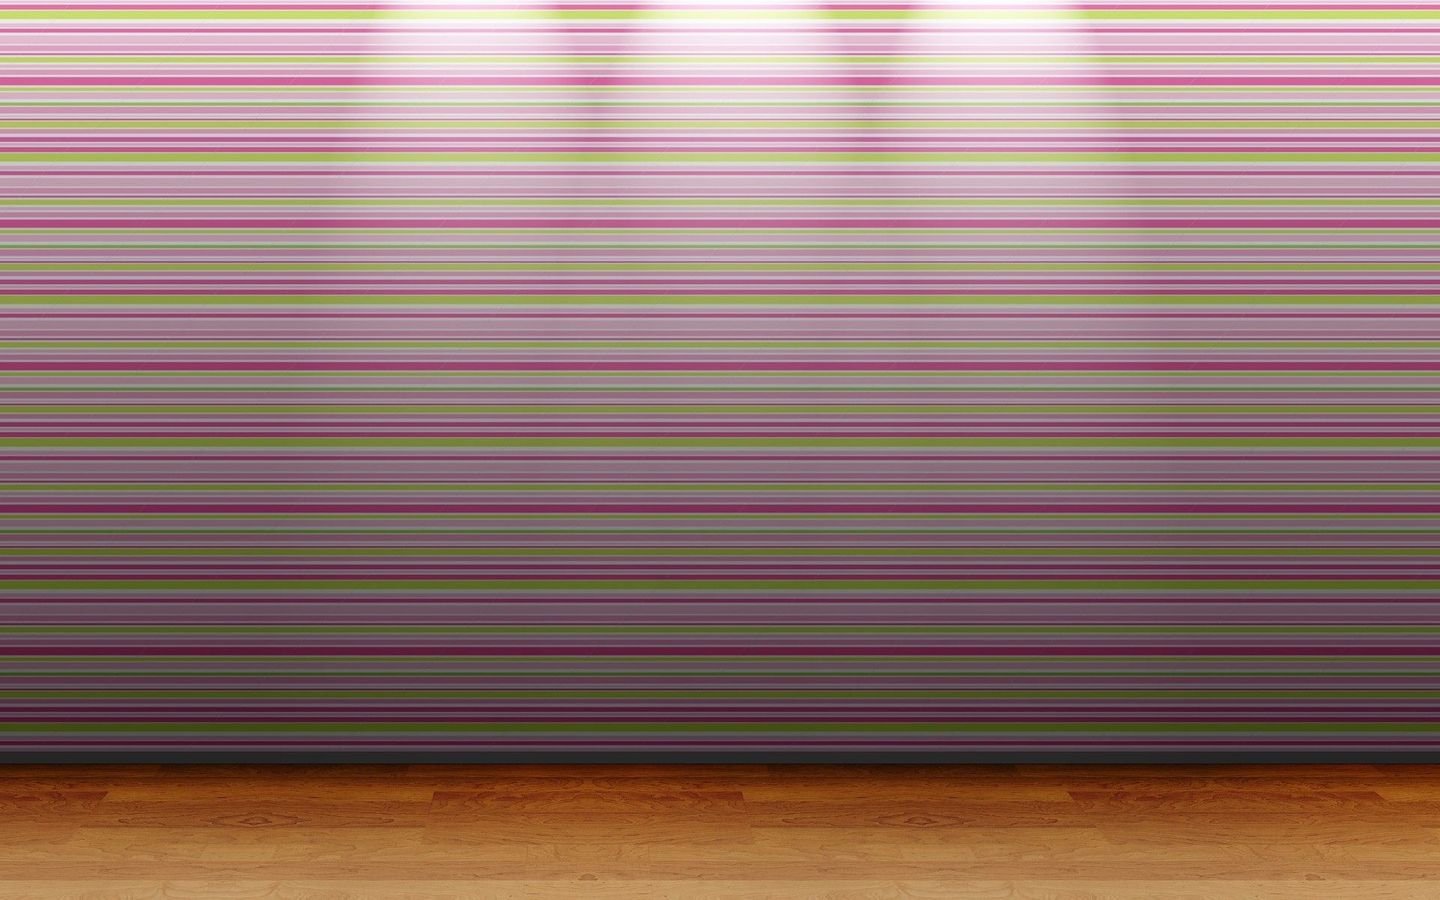 Pink Wall Stripes And Wood Floor Wallpaper